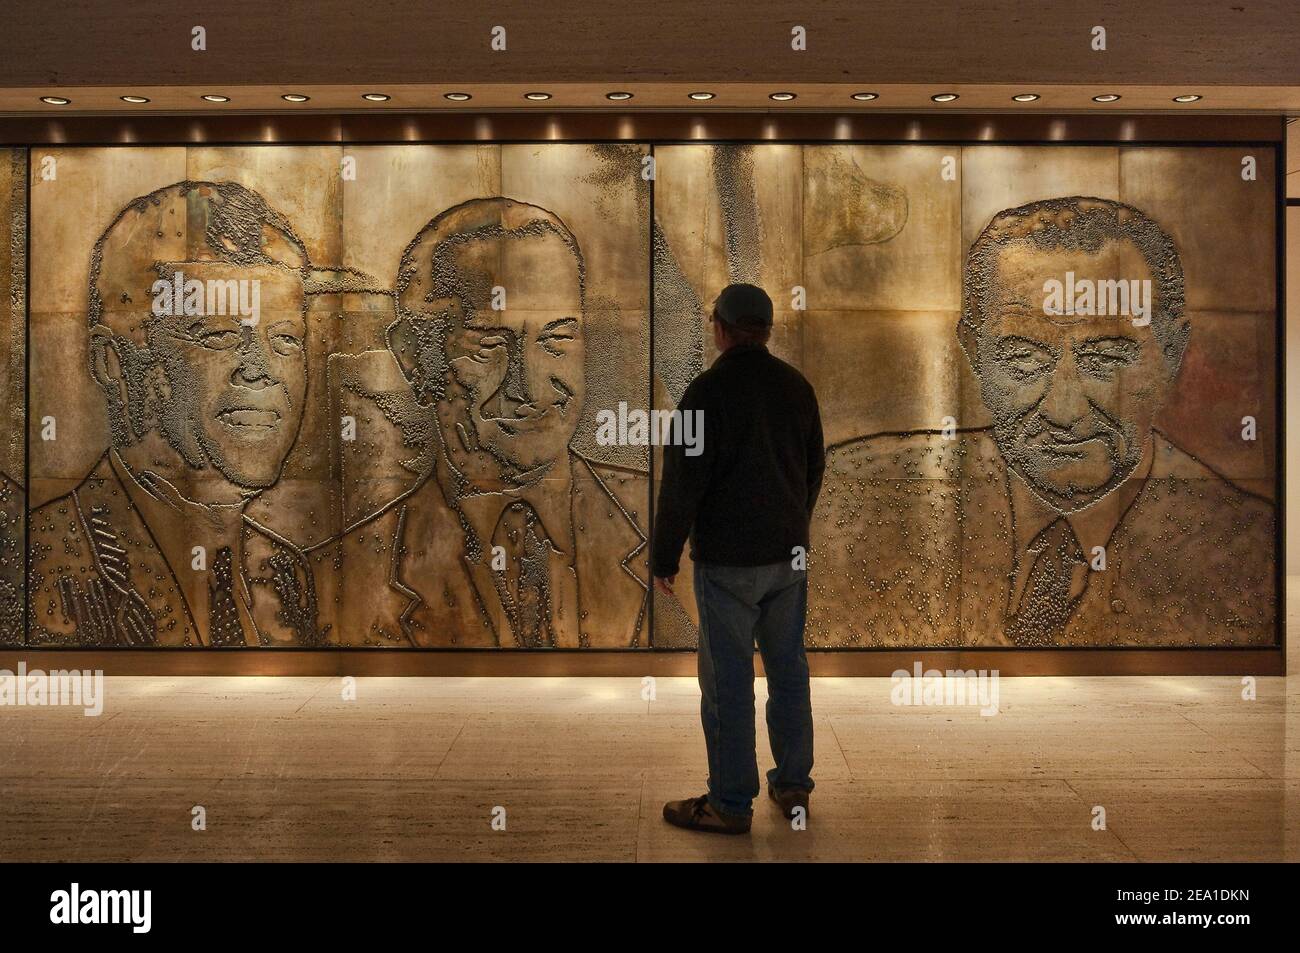 Presidents Kennedy and Johnson in photo-engraving magnesium mural by Naomi Savage, Great Hall, Lyndon Johnson Library and Museum in Austin, Texas, USA Stock Photo